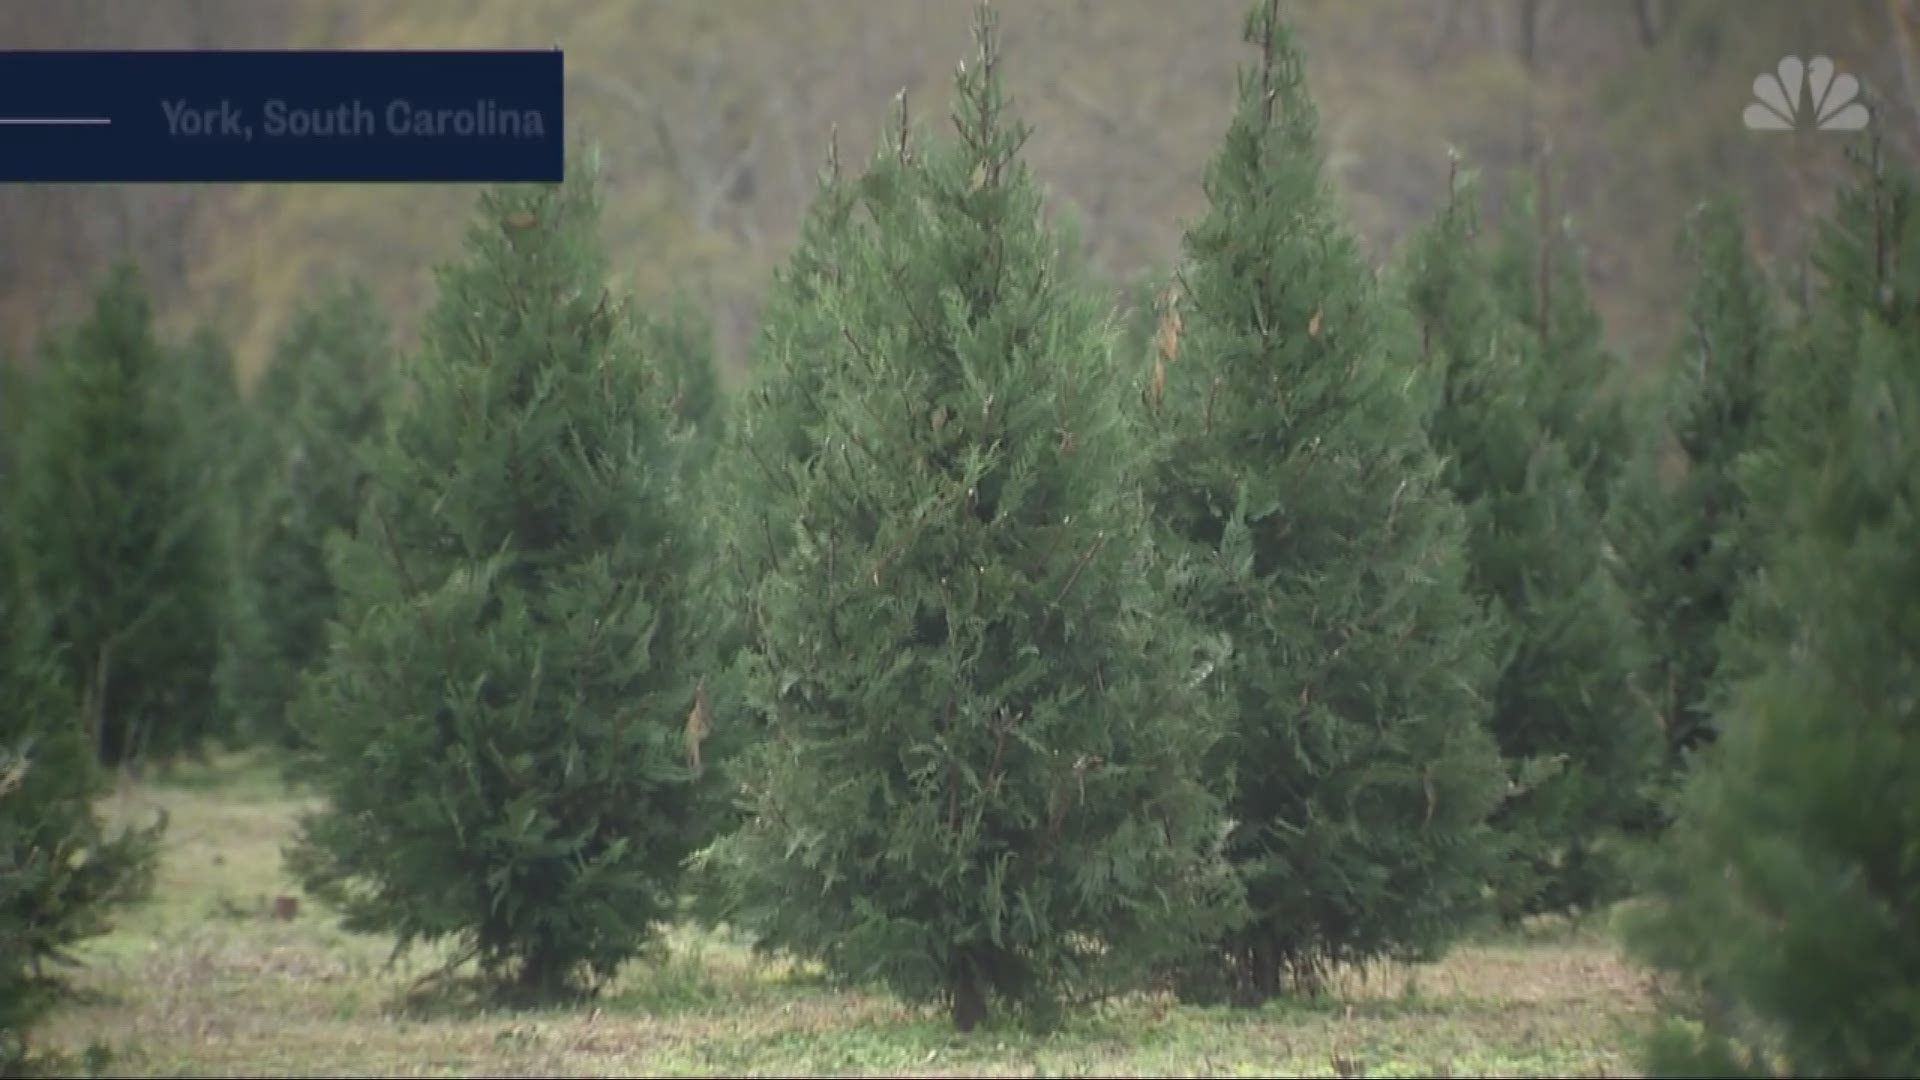 The smell of a live Christmas tree in our homes may not come without some very unpleasant consequences, but it doens't have to be that way. NBC's Erika Edwards reports.